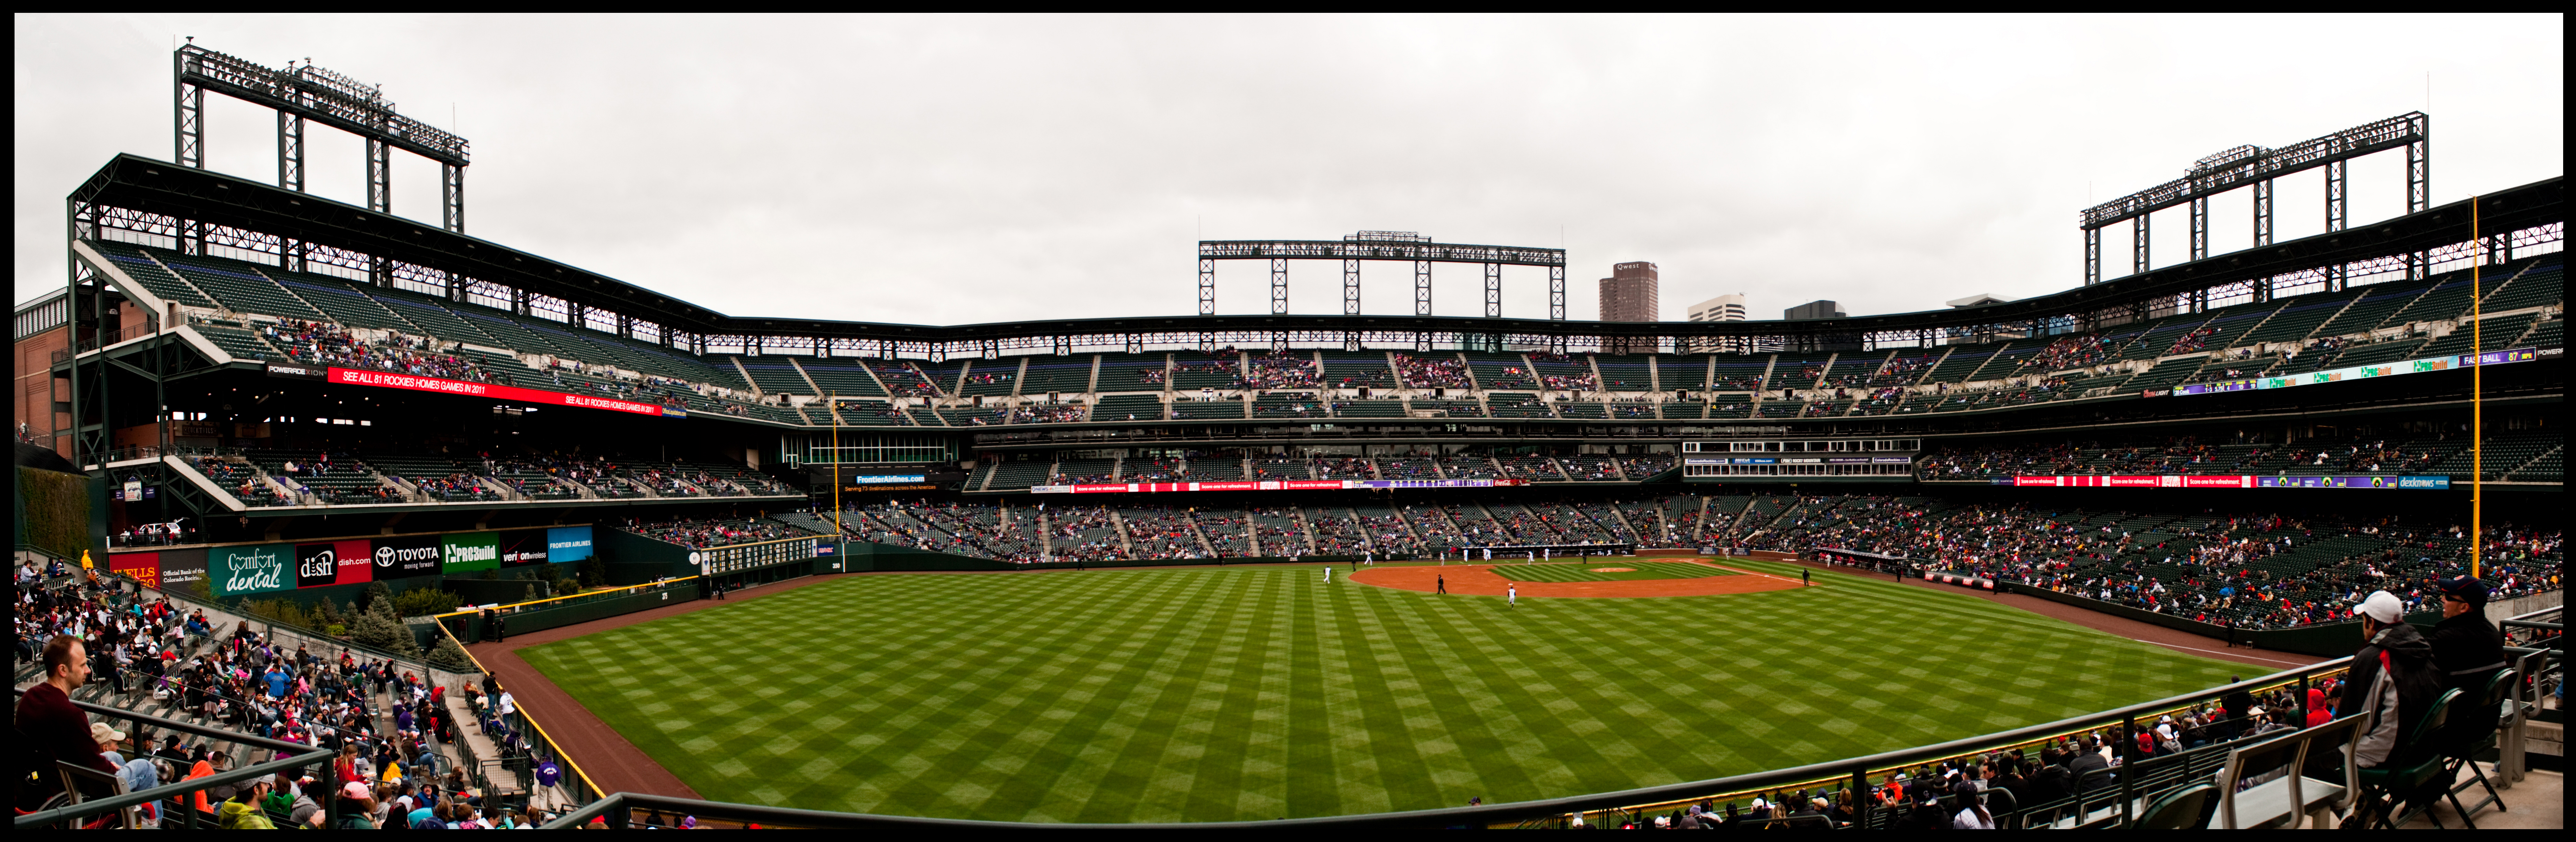 Coors Field Image Crazy Gallery